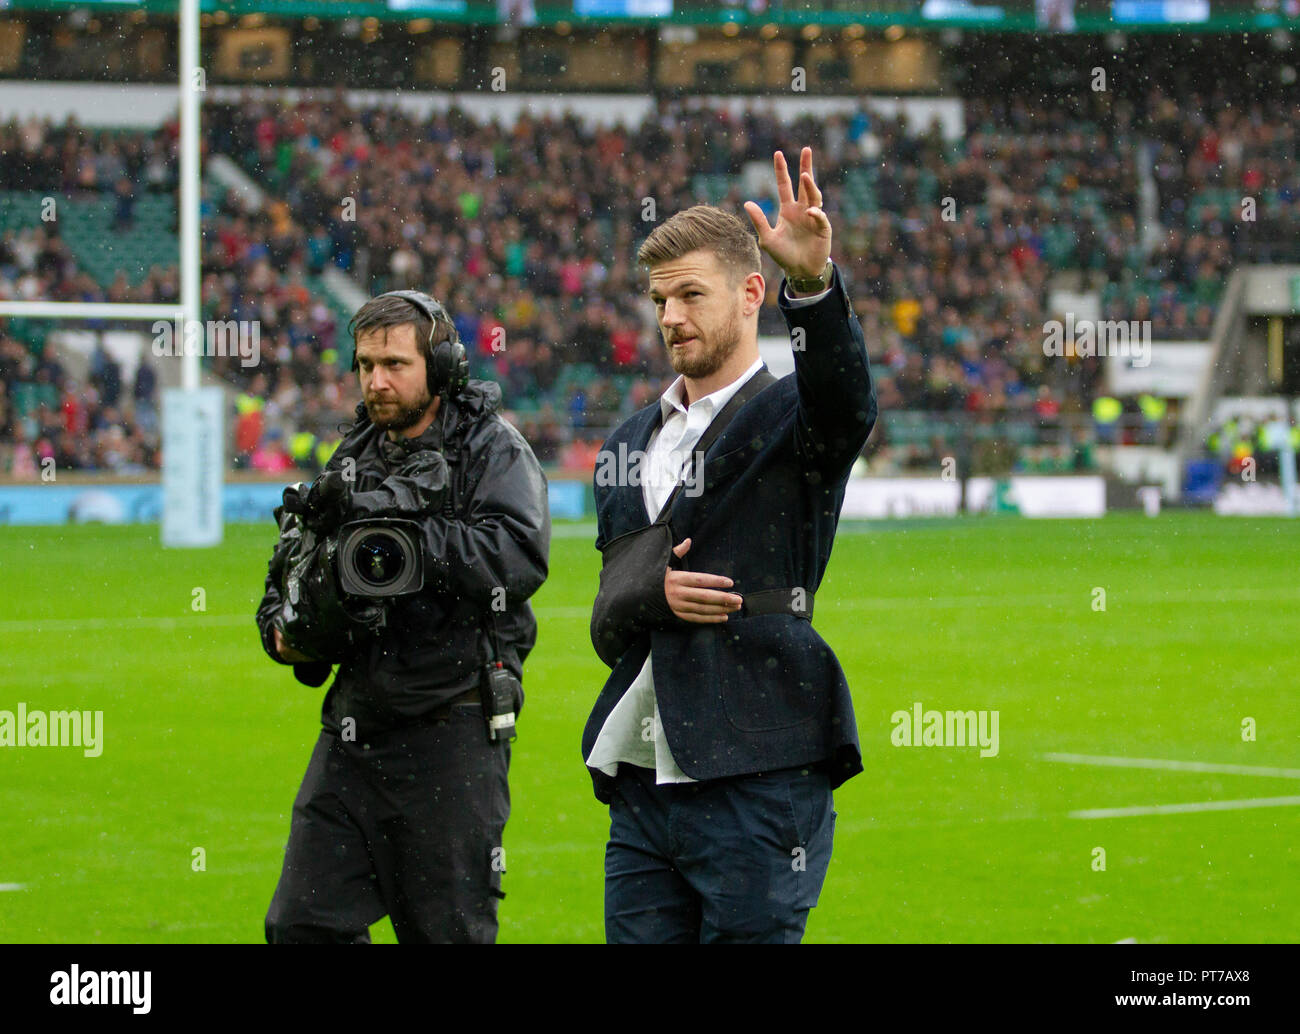 Twickenham, UK. 6th October 2018. Former Northampton Saint Rob Horne ahead of the Gallagher Premiership match between Northampton Saints and Leicester Tigers. Andrew Taylor/Alamy Live News Stock Photo